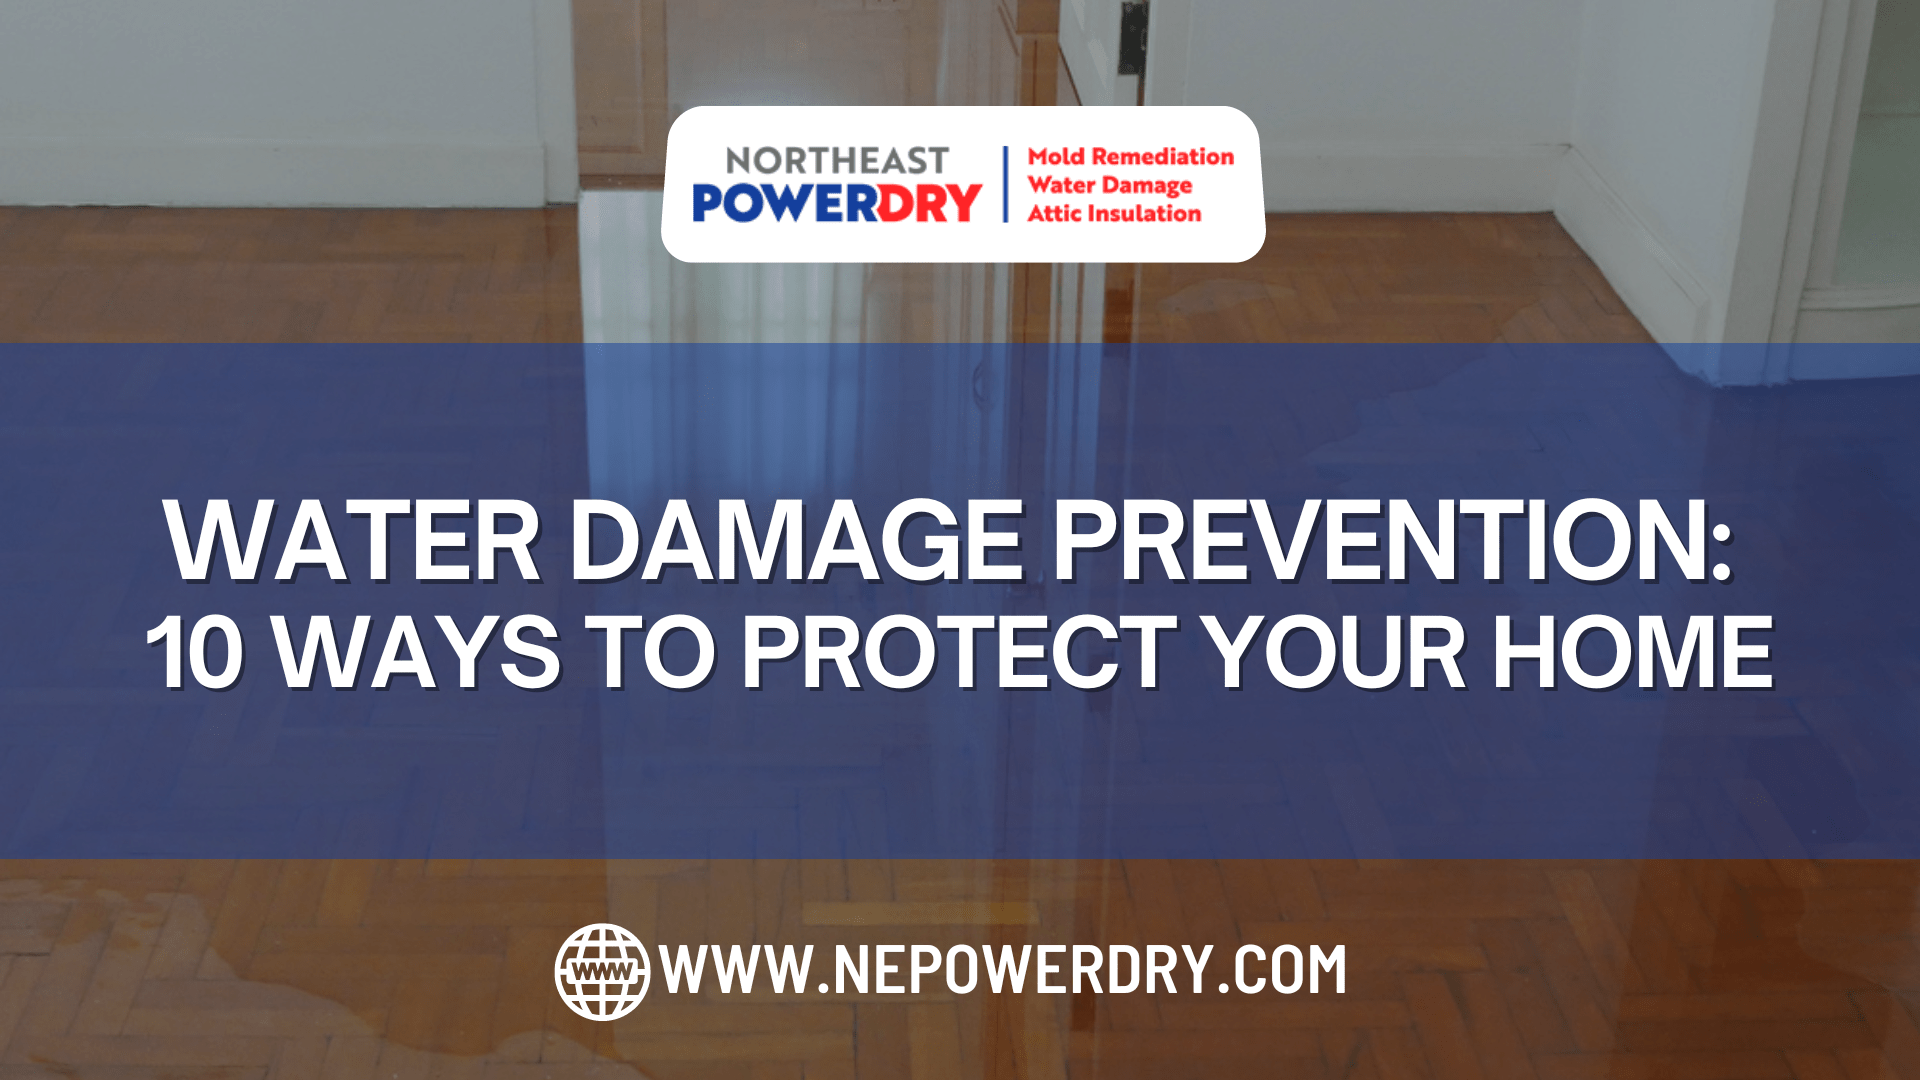 Water Damage Prevention: 10 Ways to Protect Your Home